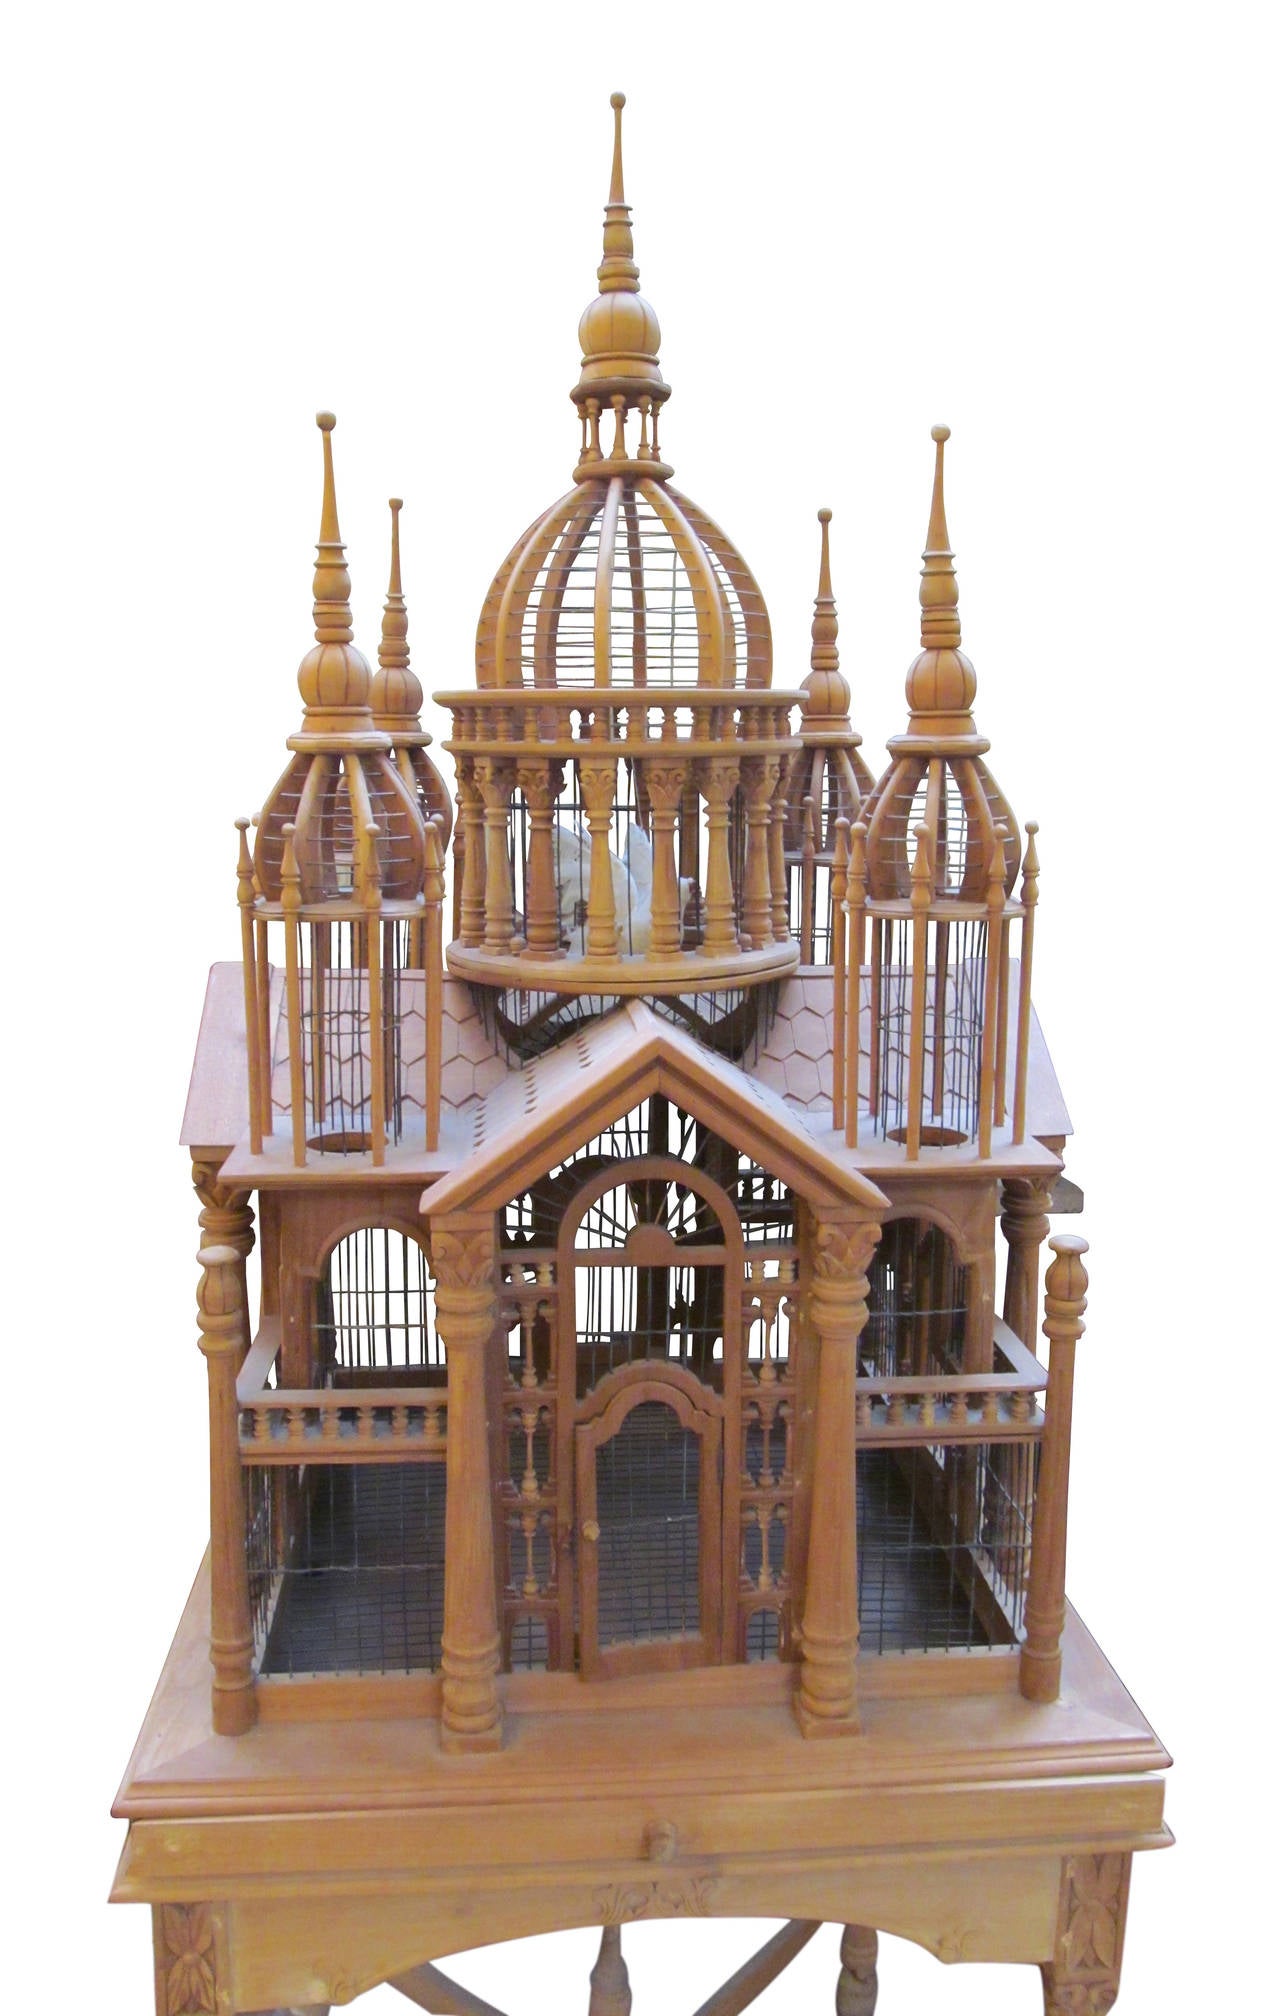 This bird house has been modeled after a mansion with watch towers, roofing and a beautiful wooden base. This item can be viewed at our 5 East 16th St, Union Square location in Manhattan.